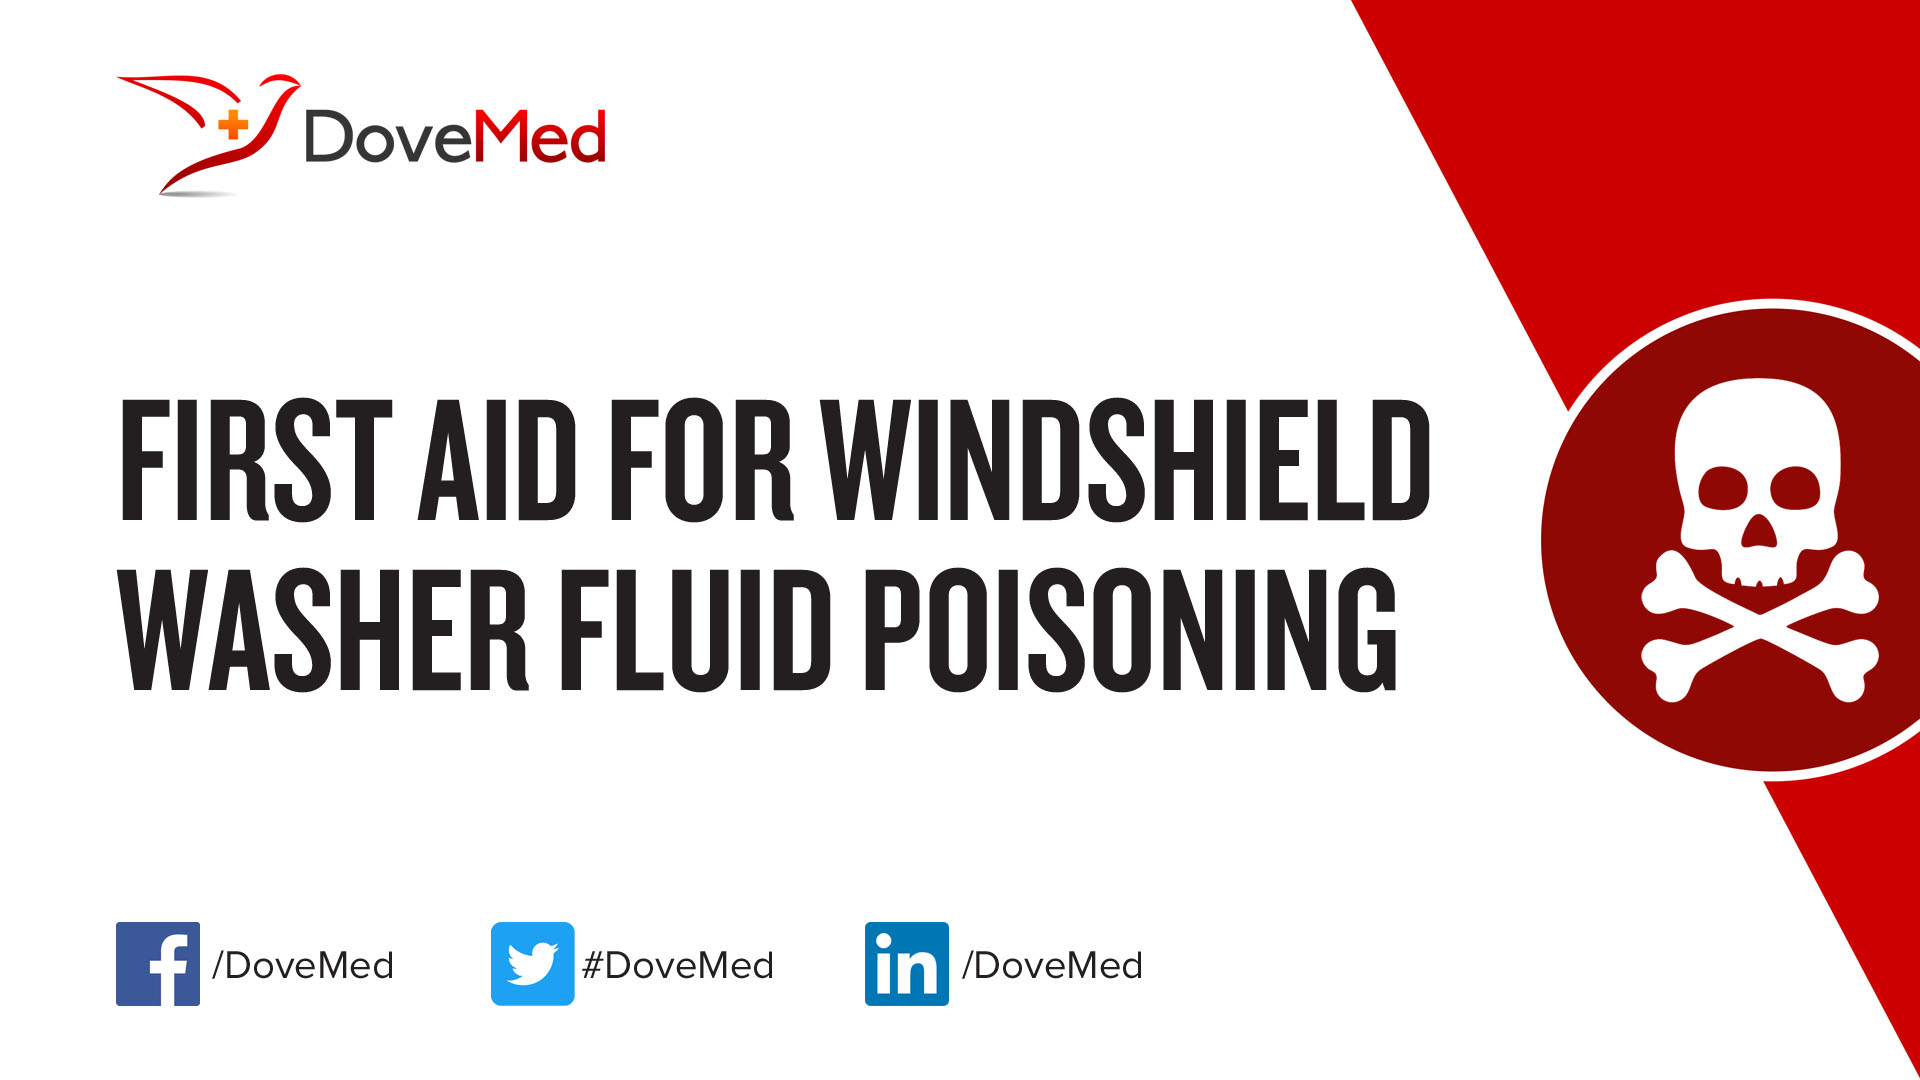 First Aid for Windshield Washer Fluid Poisoning - DoveMed